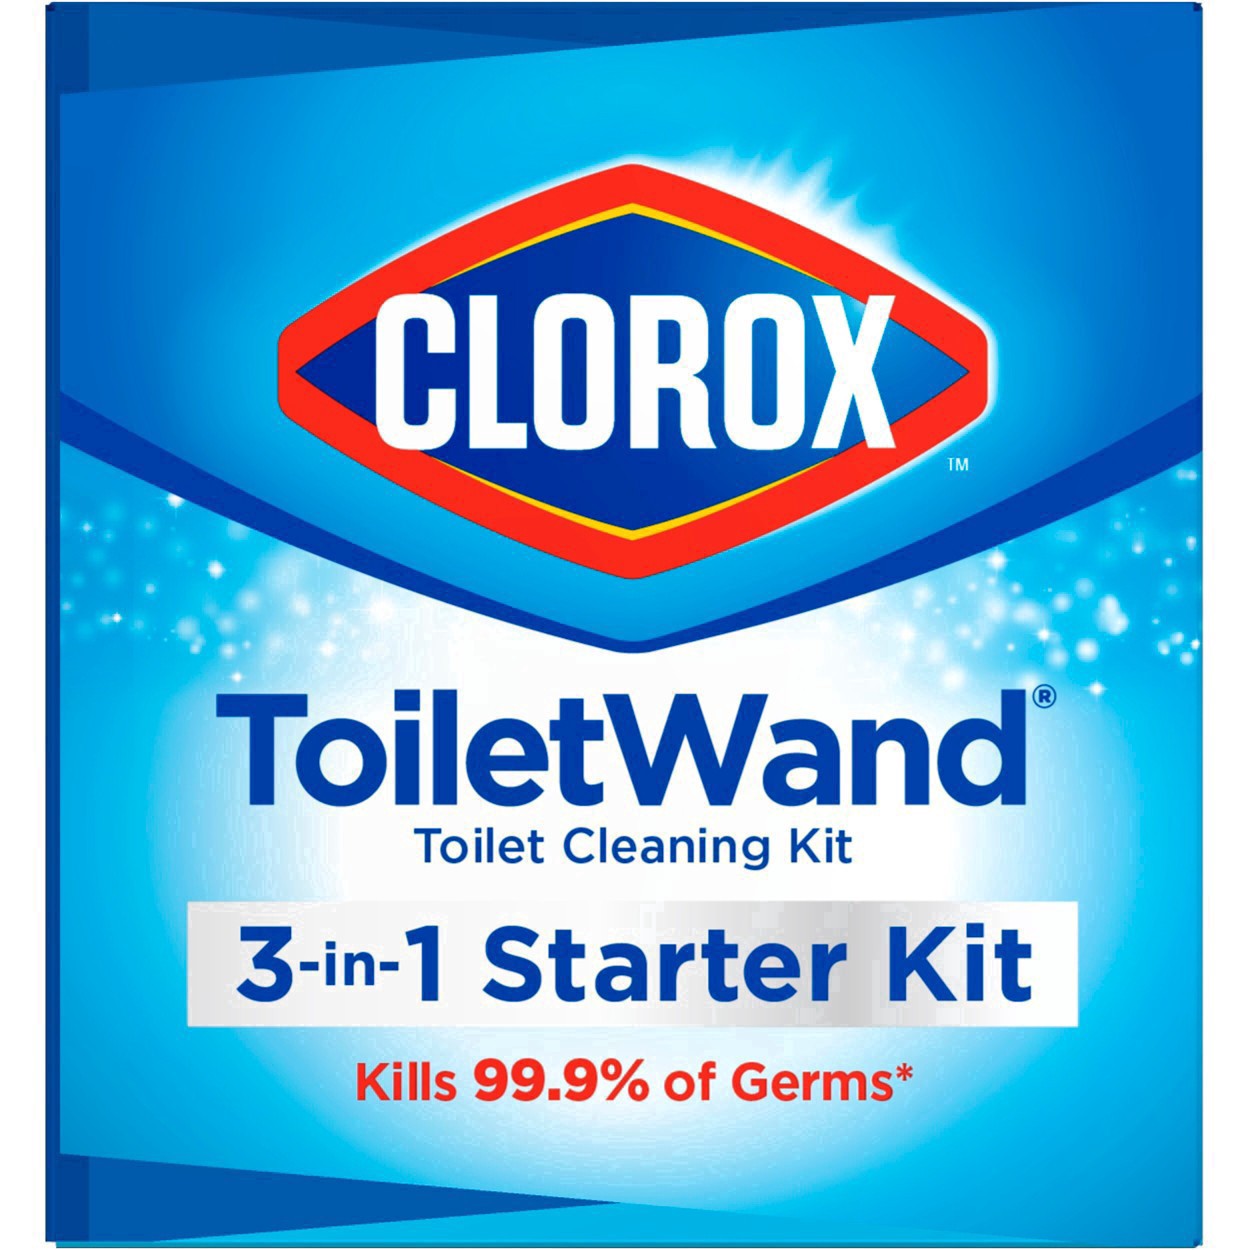 slide 118 of 176, Clorox Toilet Wand 3-in-1 Starter Toliet Cleaning Kit, 1 ct